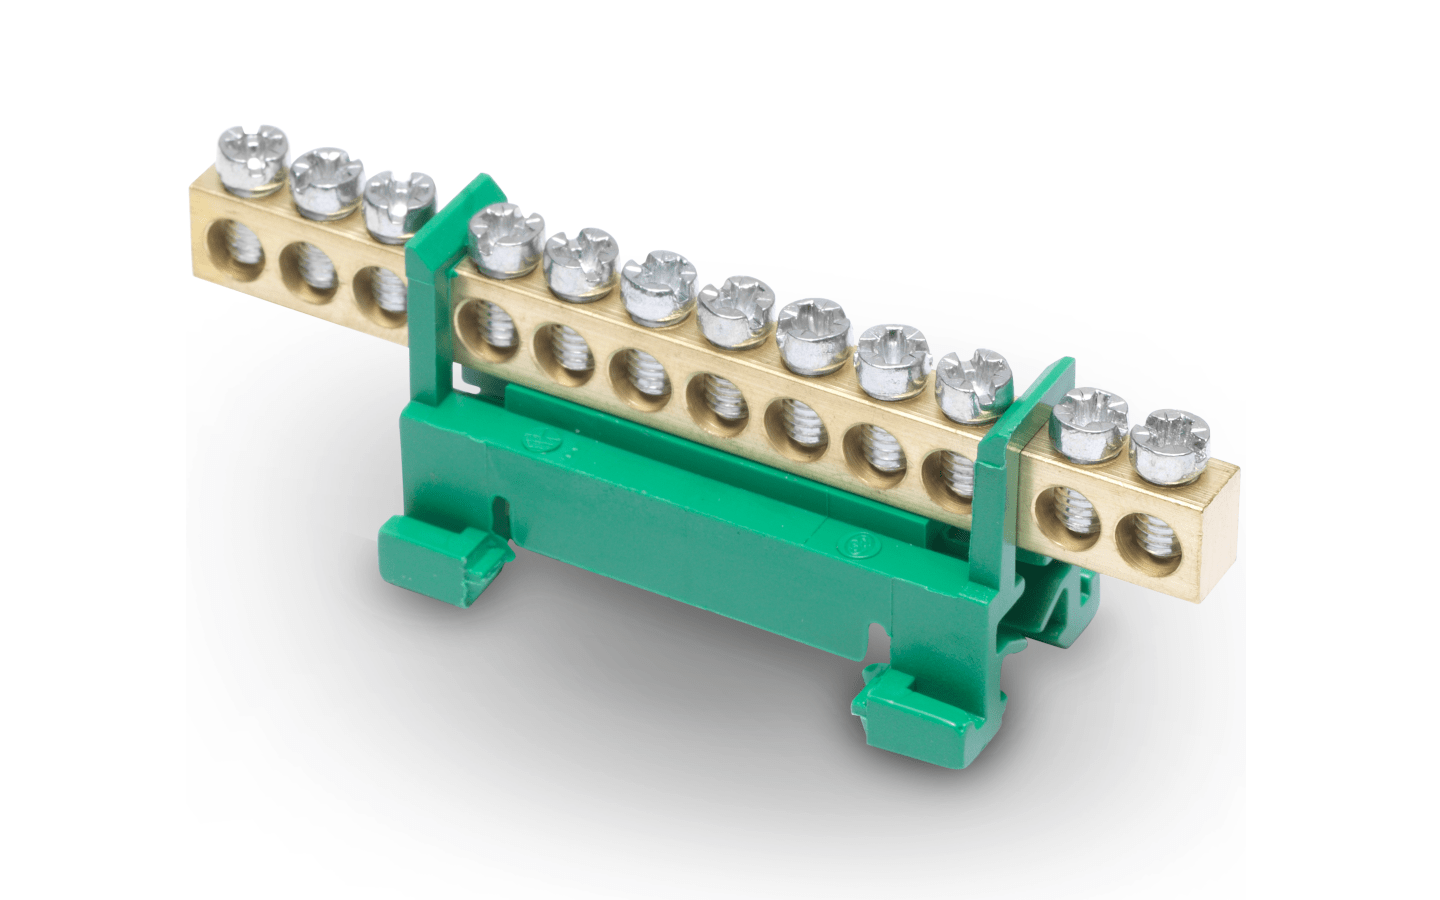 Earthing bar with green holder and 12 terminal points